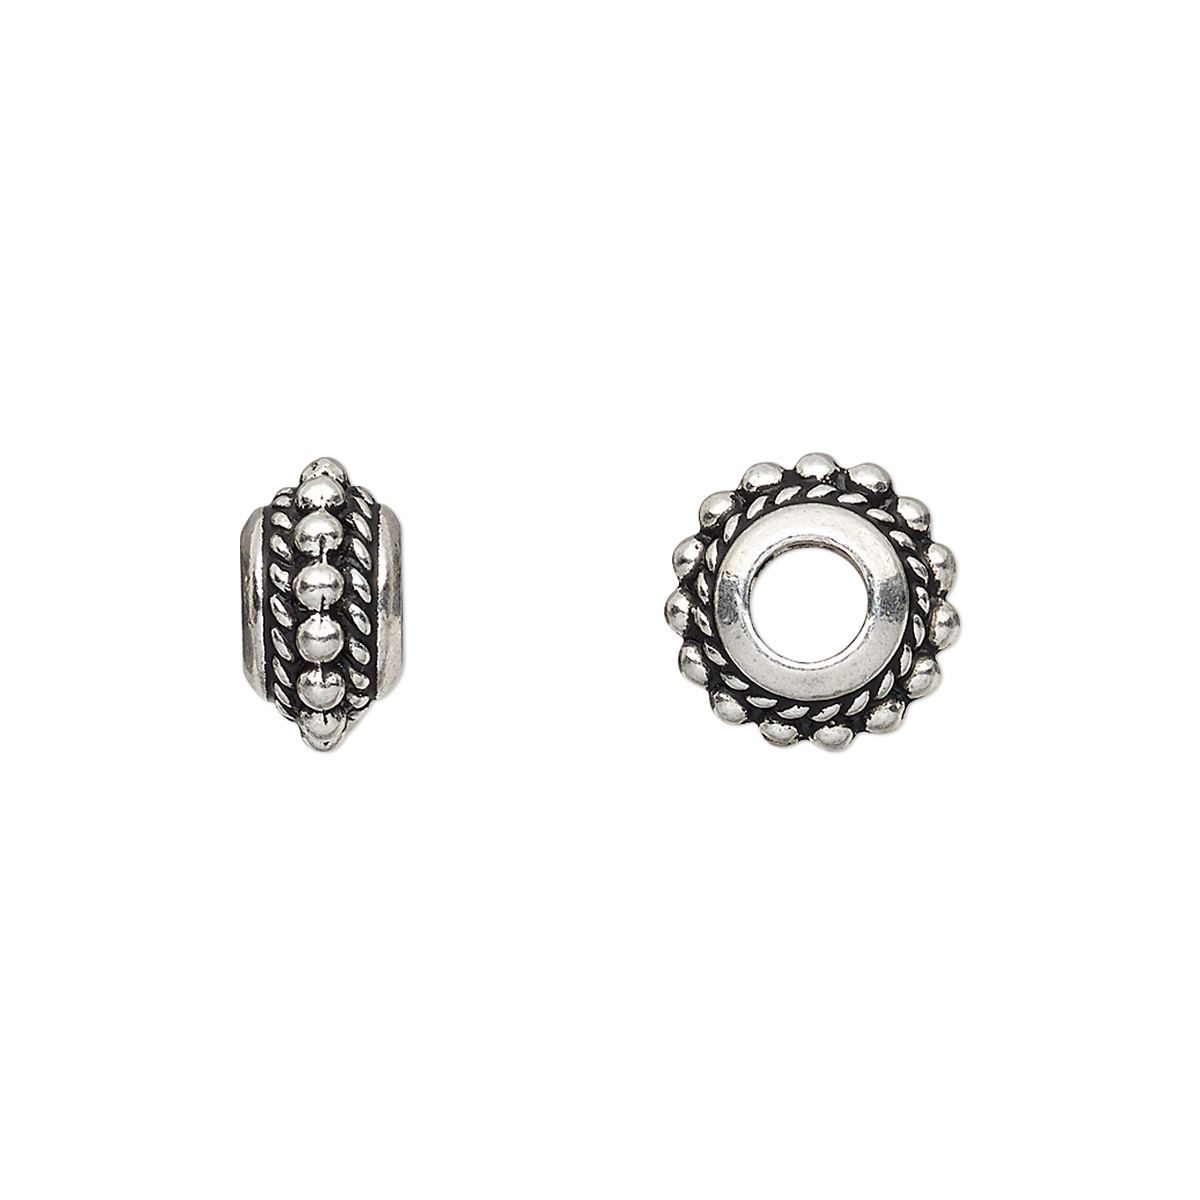 Bead, TierraCast®, antique silver-plated pewter (tin-based alloy ...